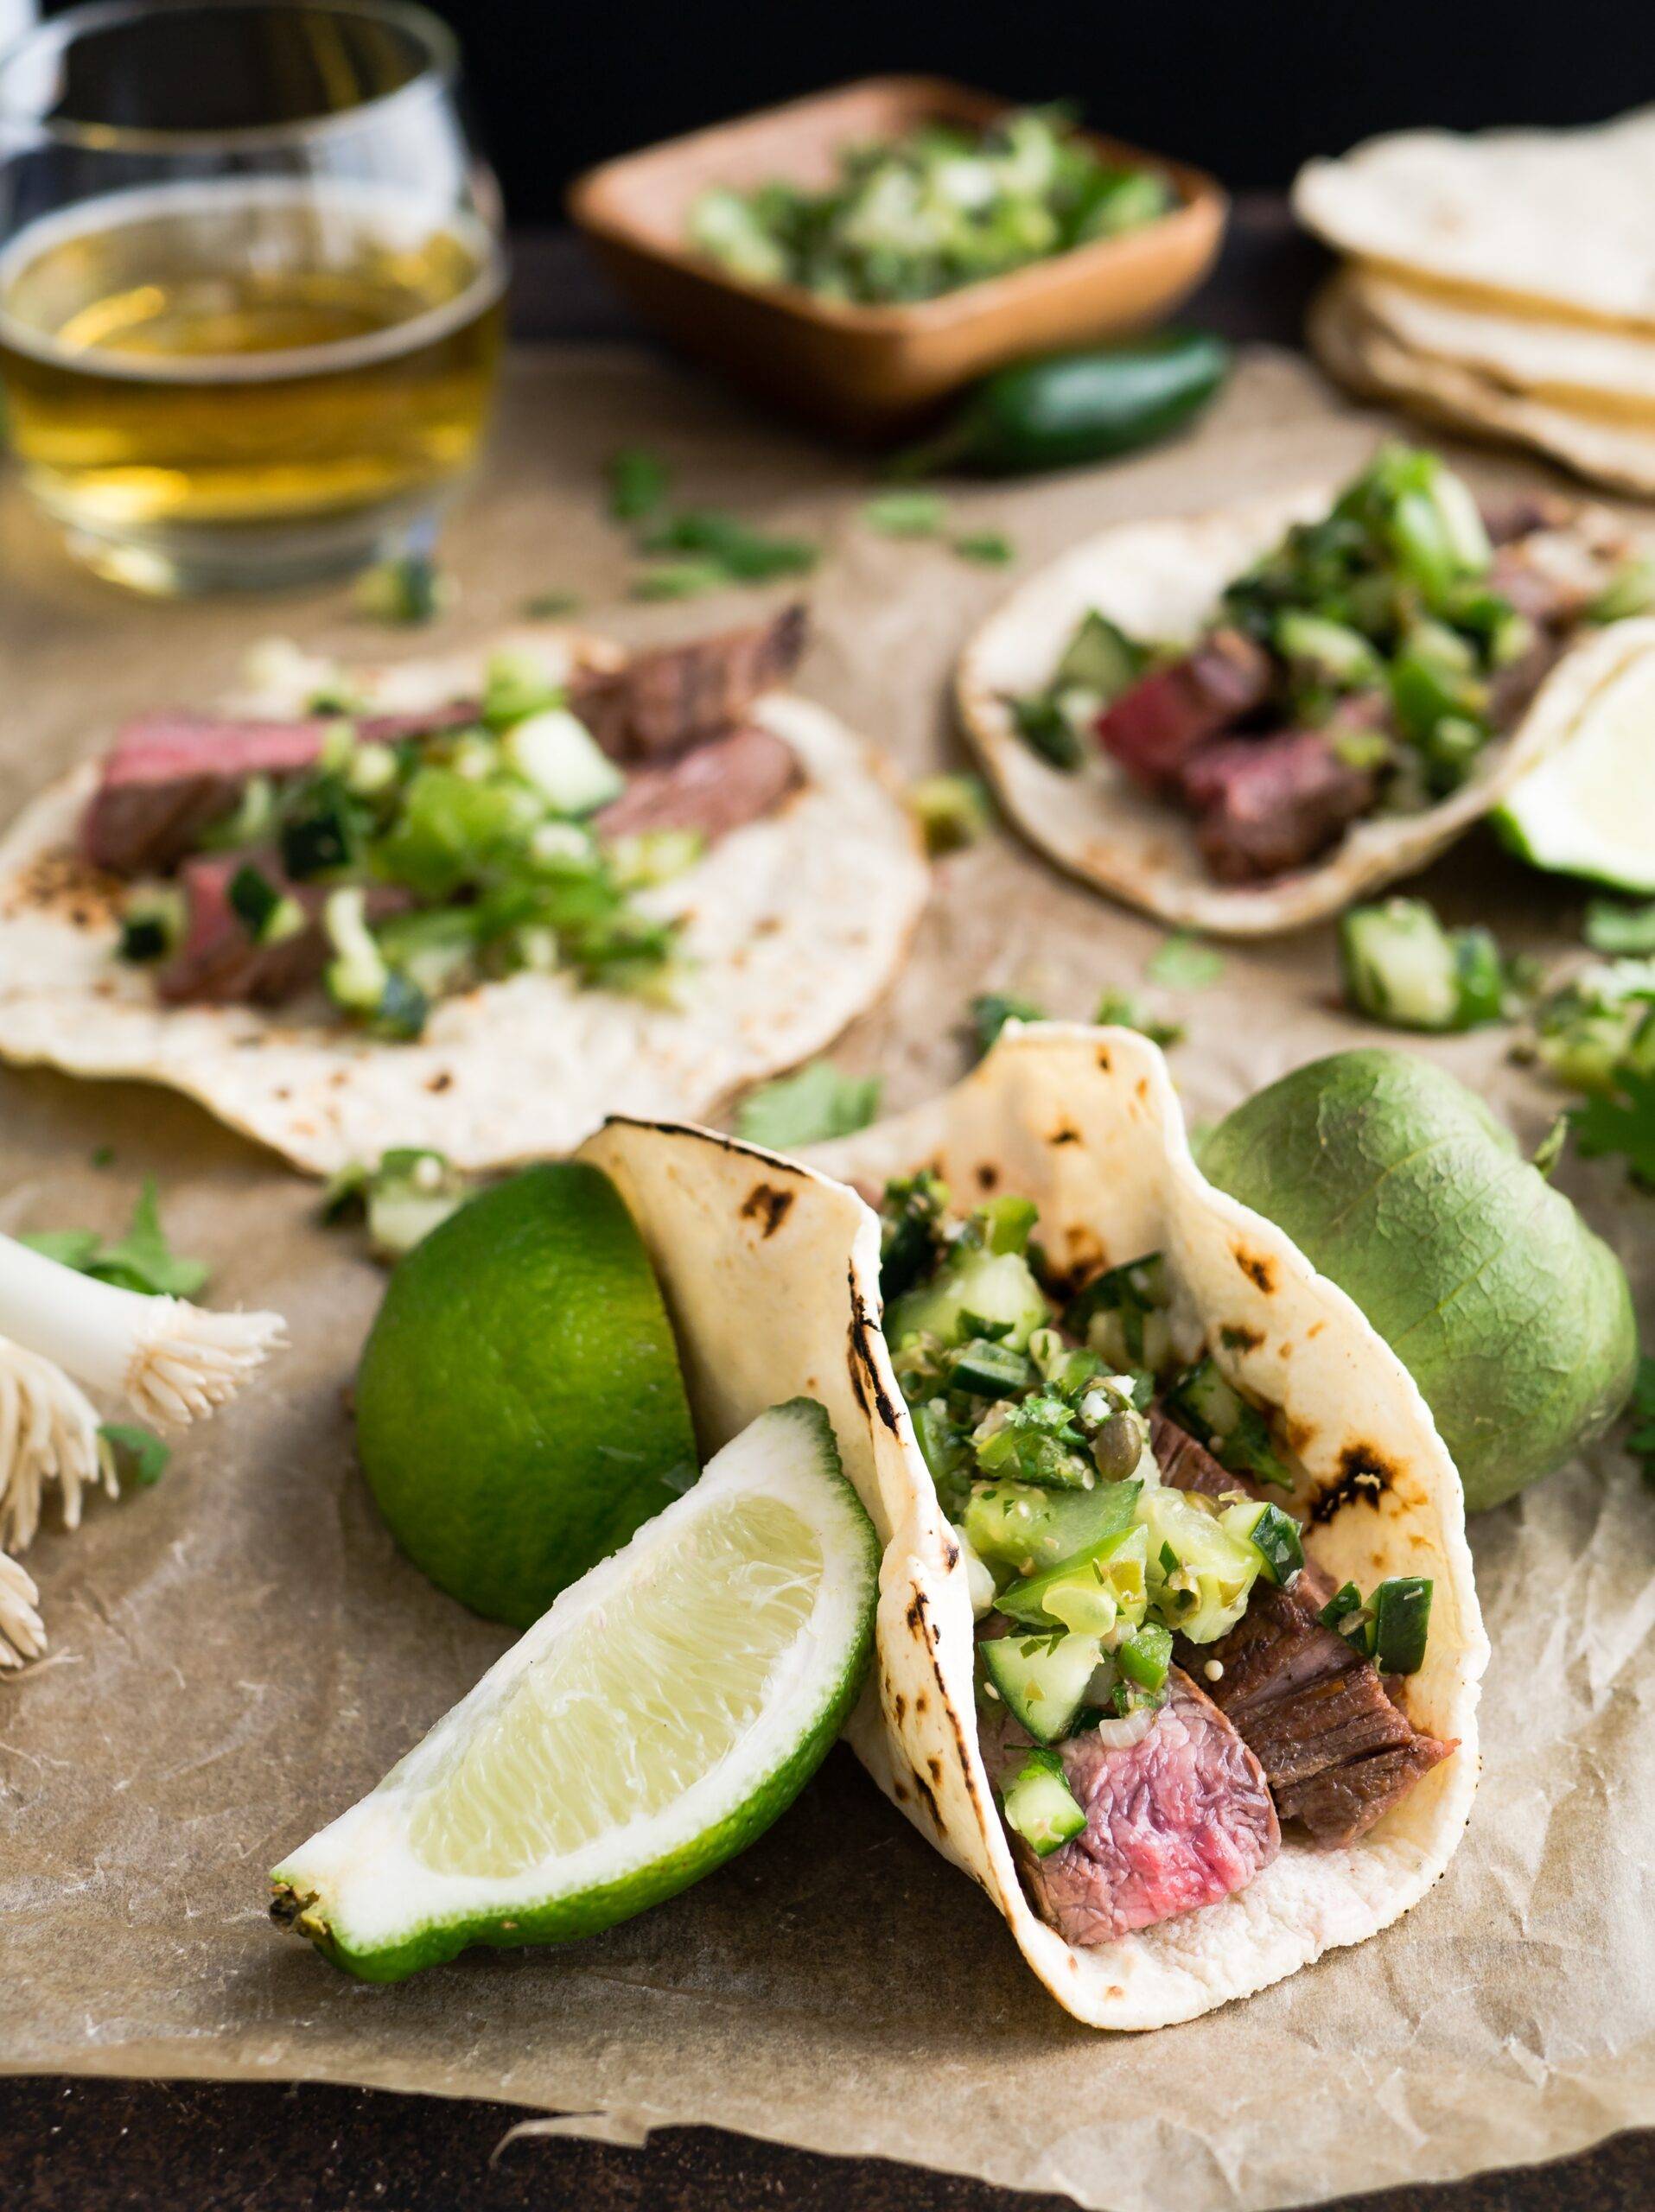 7 Mexican Street Food’s Recipes To Make At Home